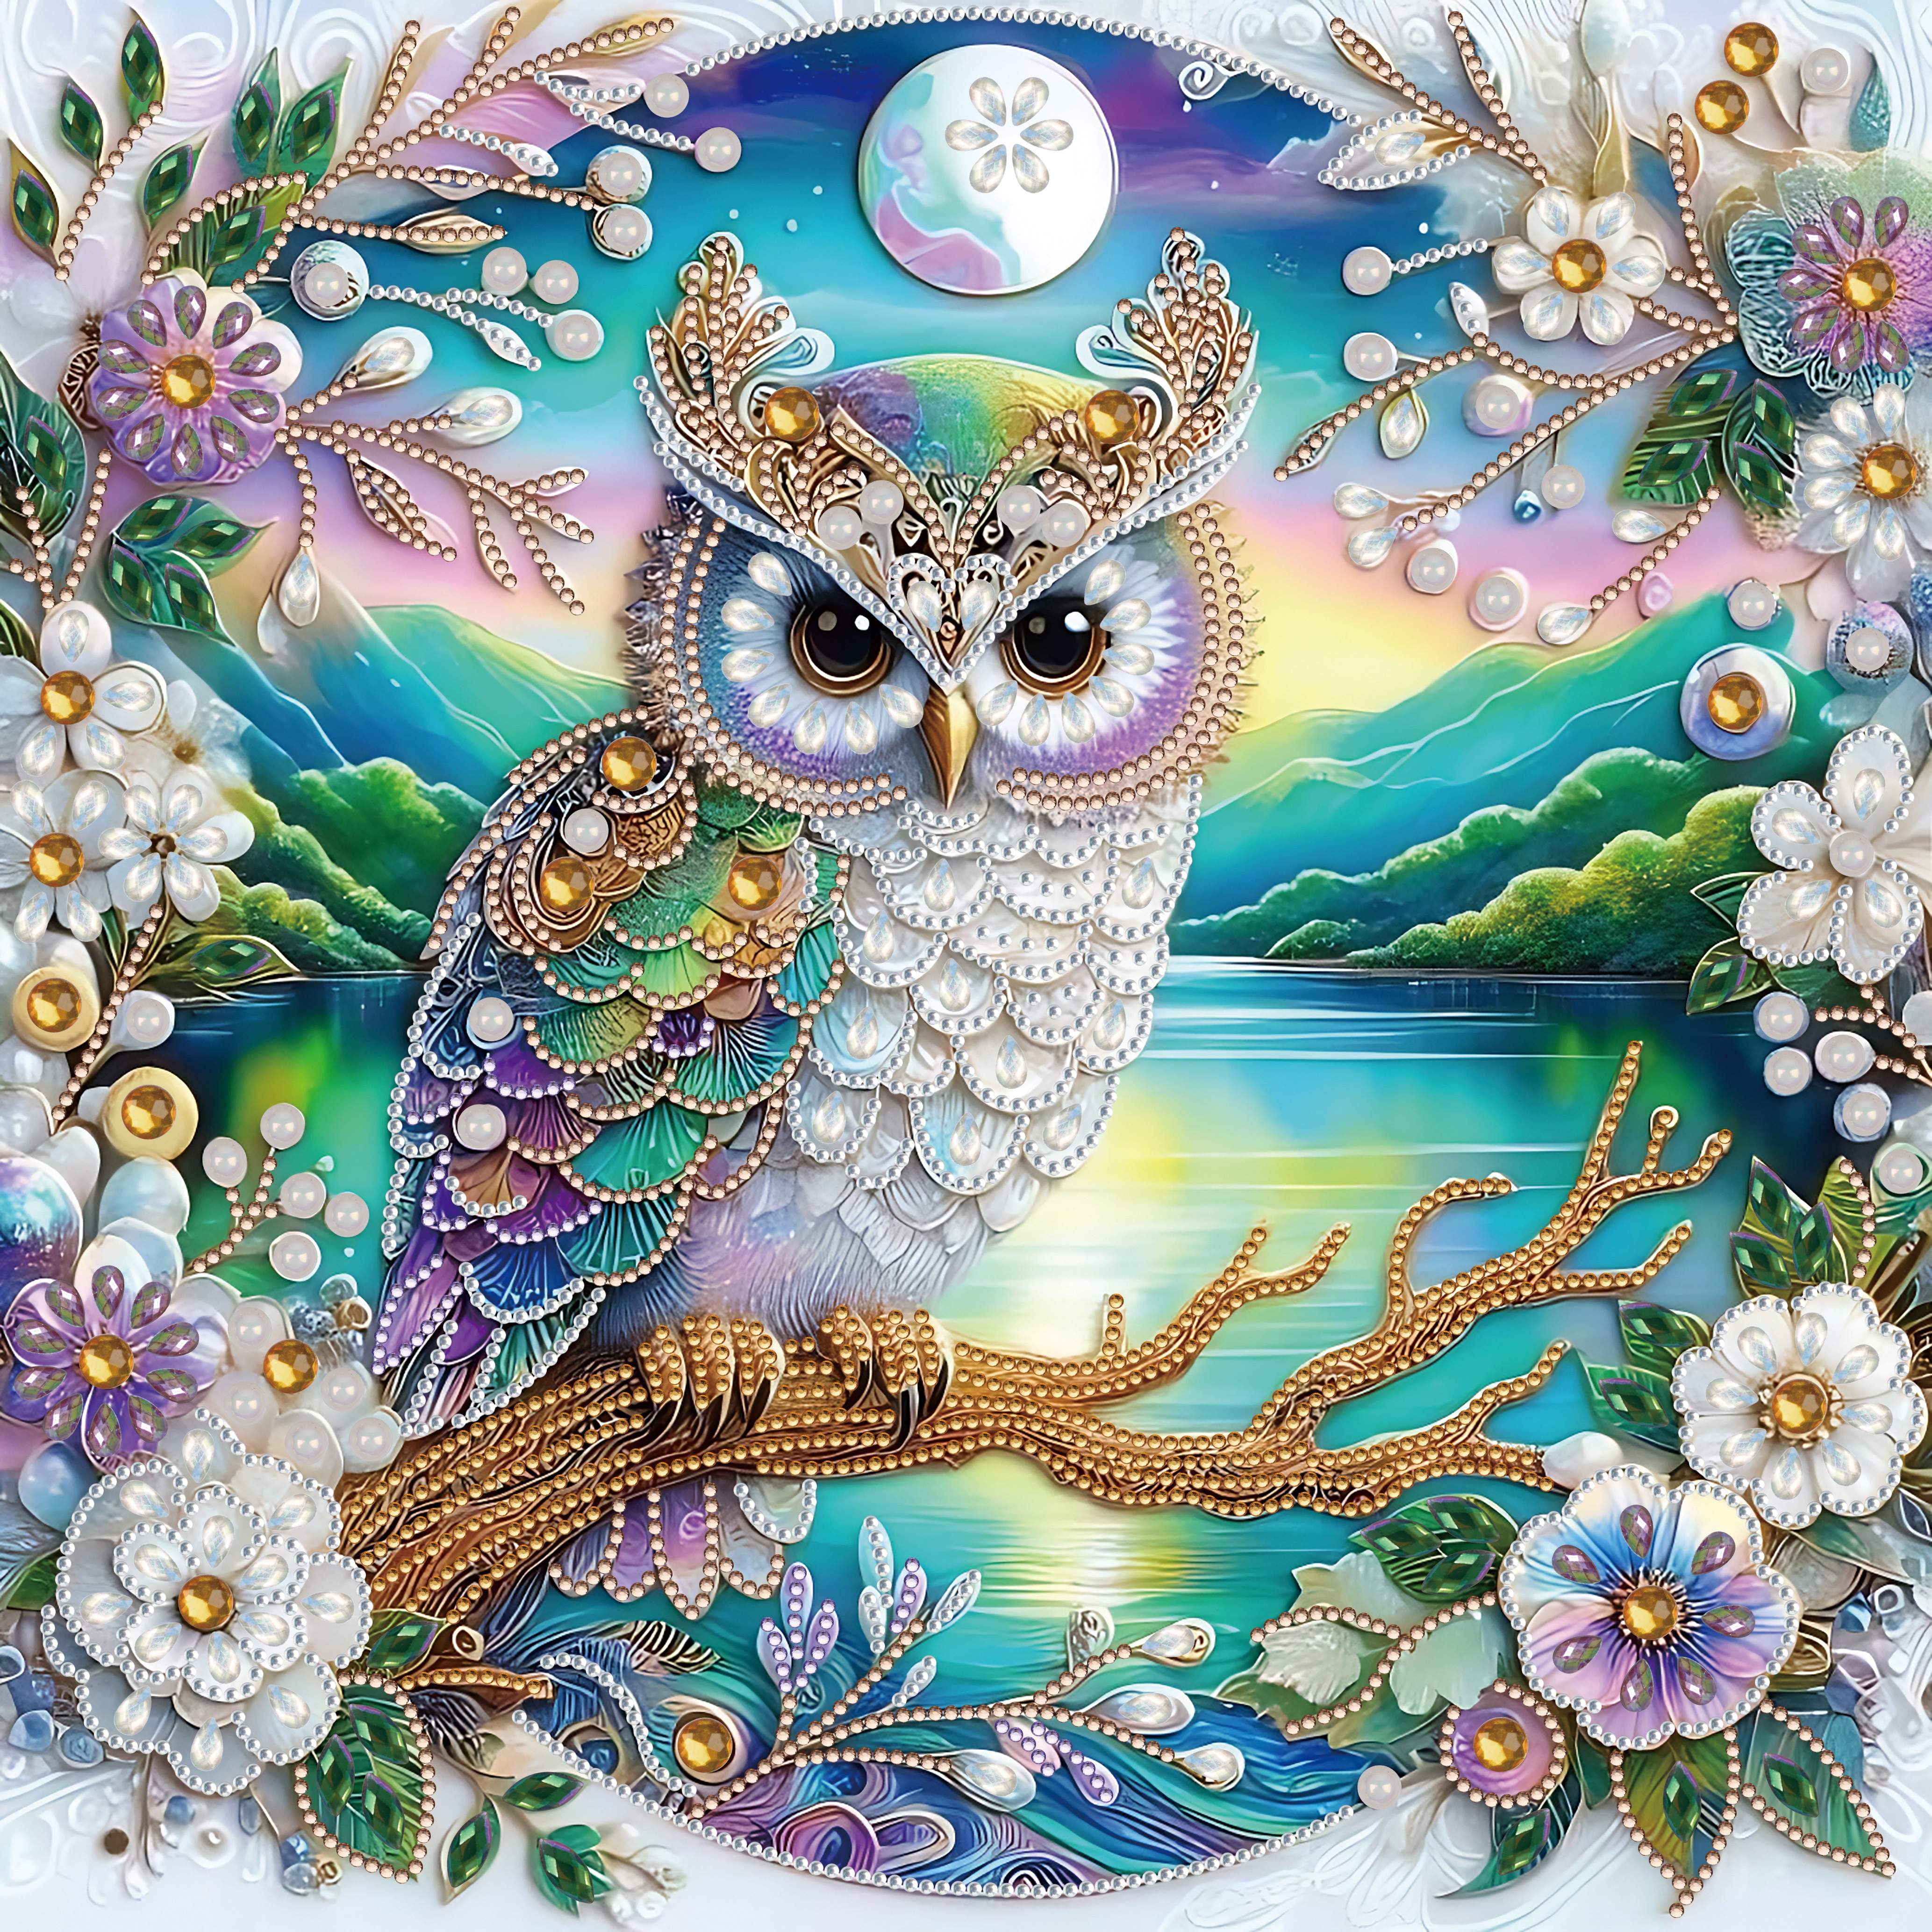 

Diy 5d Owl & Floral Diamond Painting Kit - Special Shaped Crystal Art, Frameless Mosaic Craft For Home Decor, Perfect Holiday Gift (15.7x15.7inch)